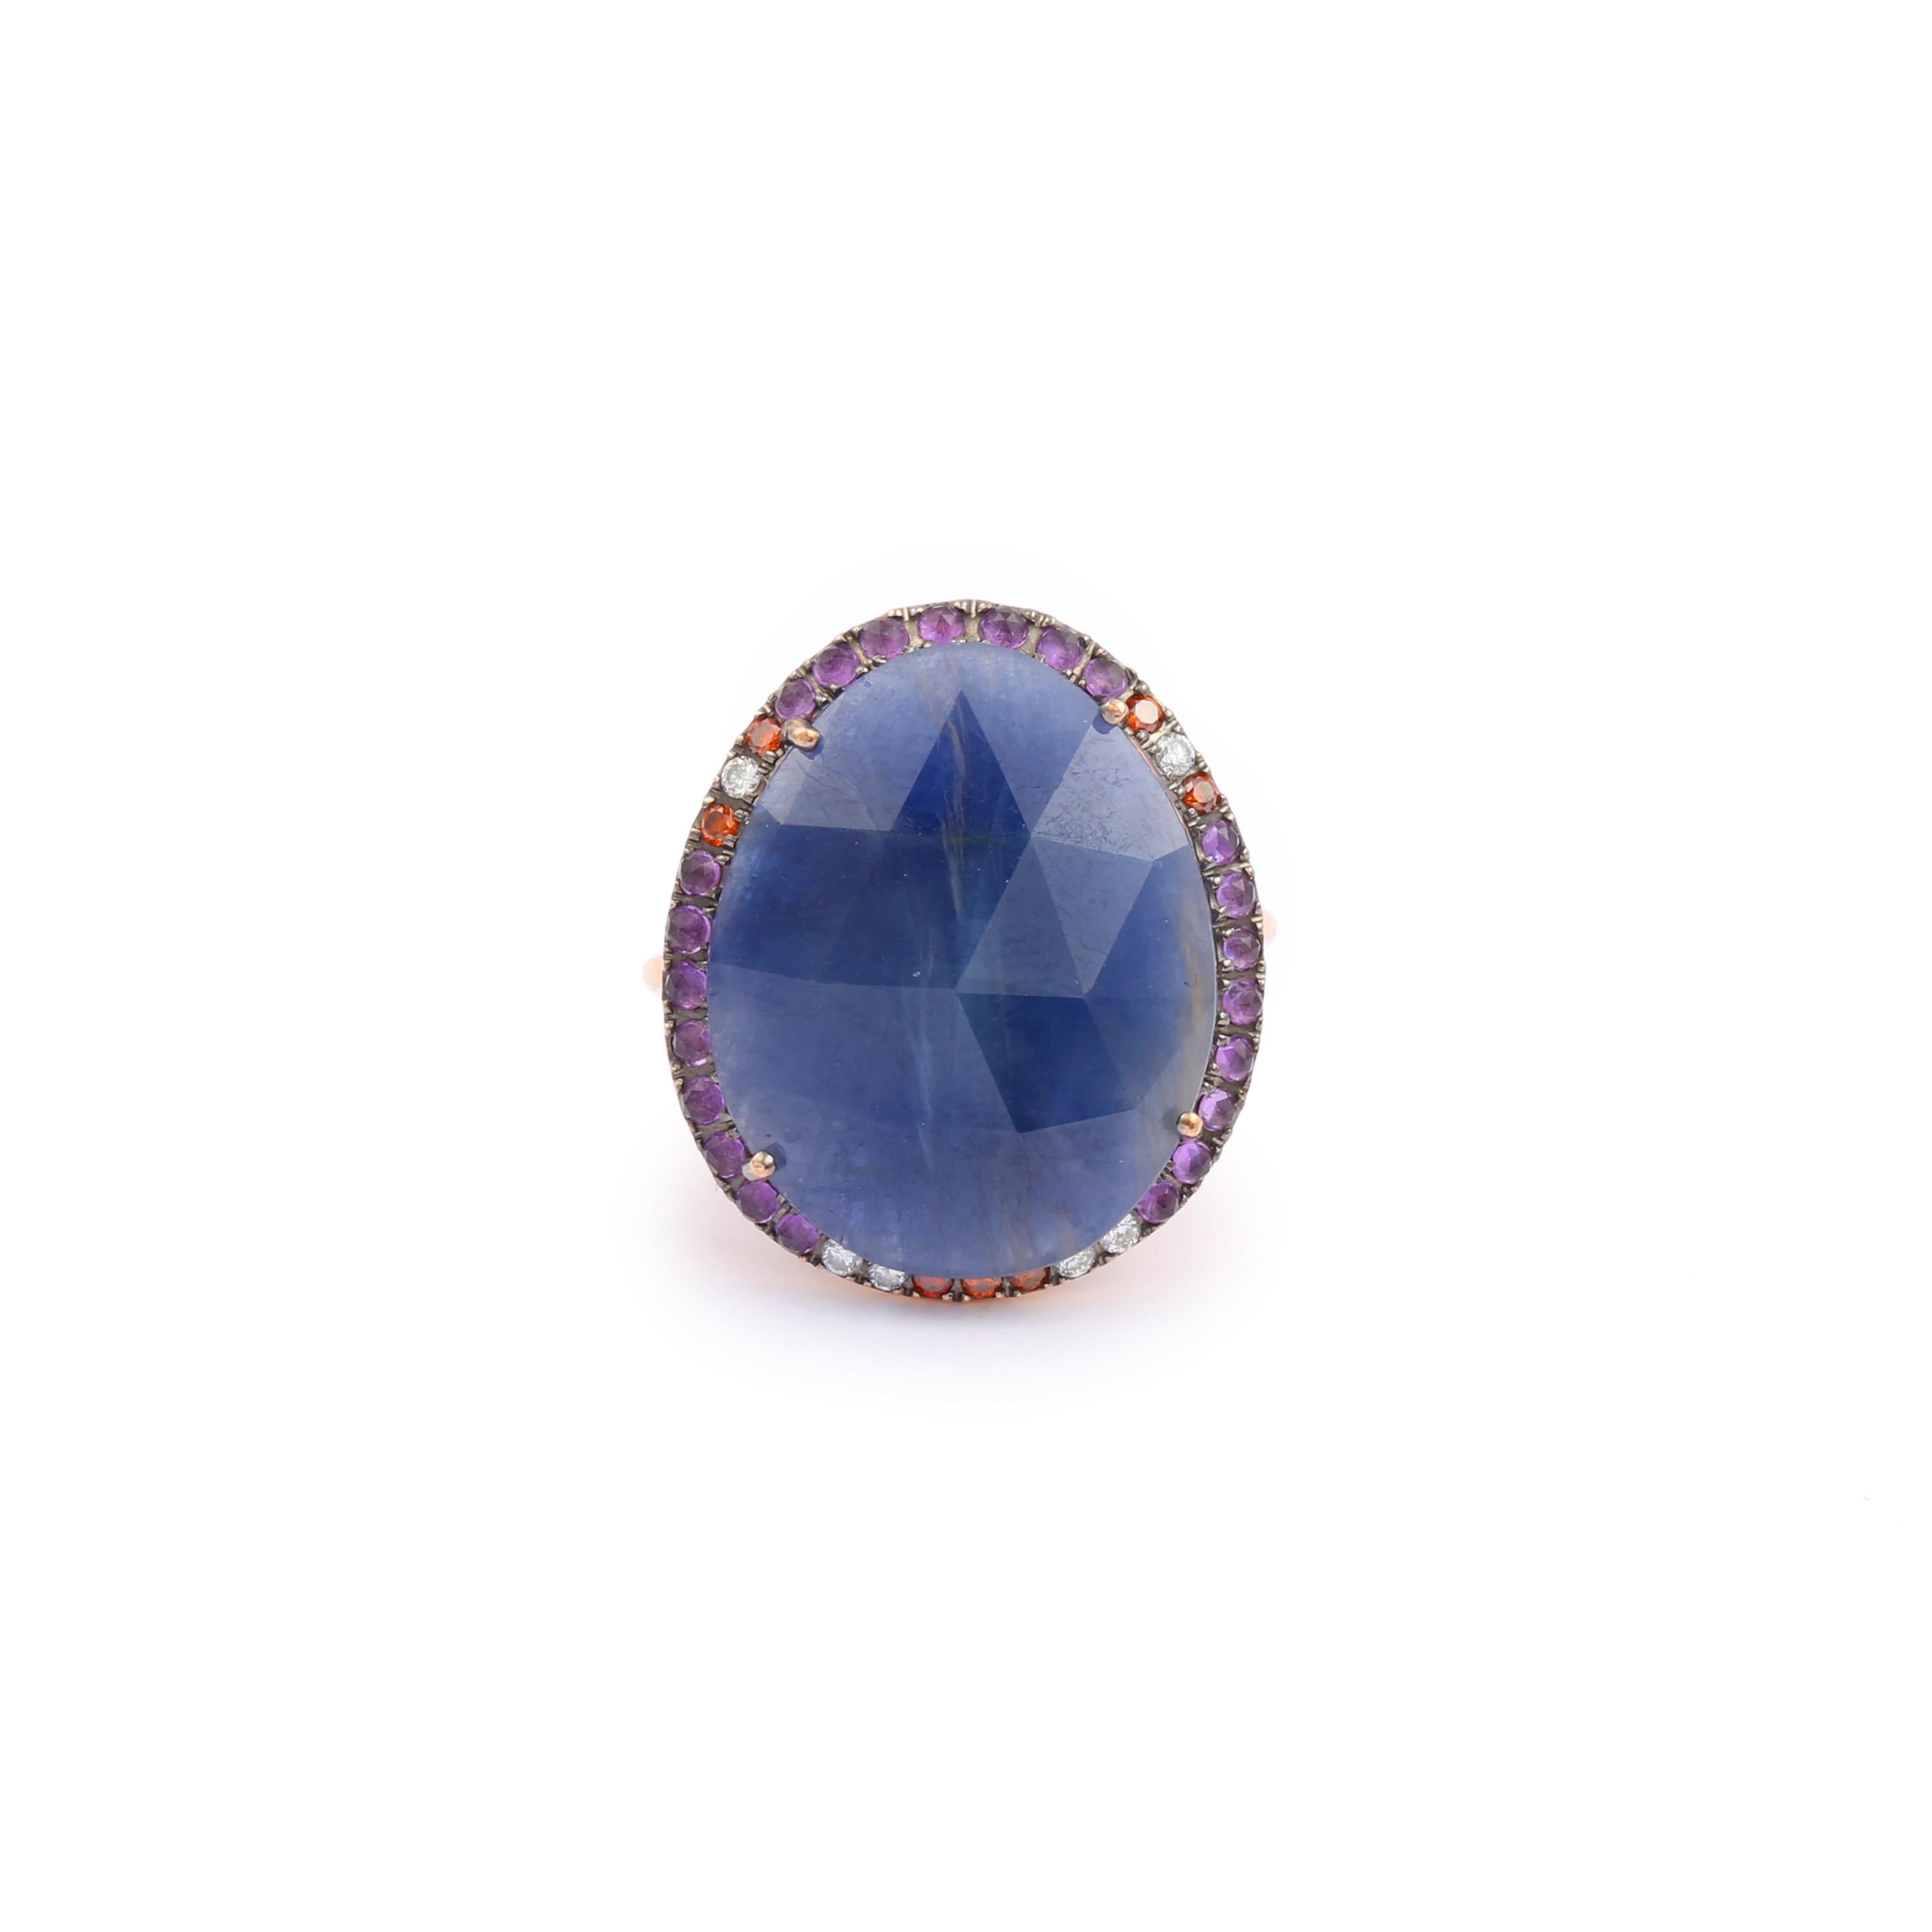 Rose gold ring set with a faceted cabochon of sapphire root in a setting of diamonds, amethysts and red stones. 

Estimated weight of the sapphire : 19 carats

Total estimated weight of amethysts : 0.20 carats

Total estimated weight of diamonds :